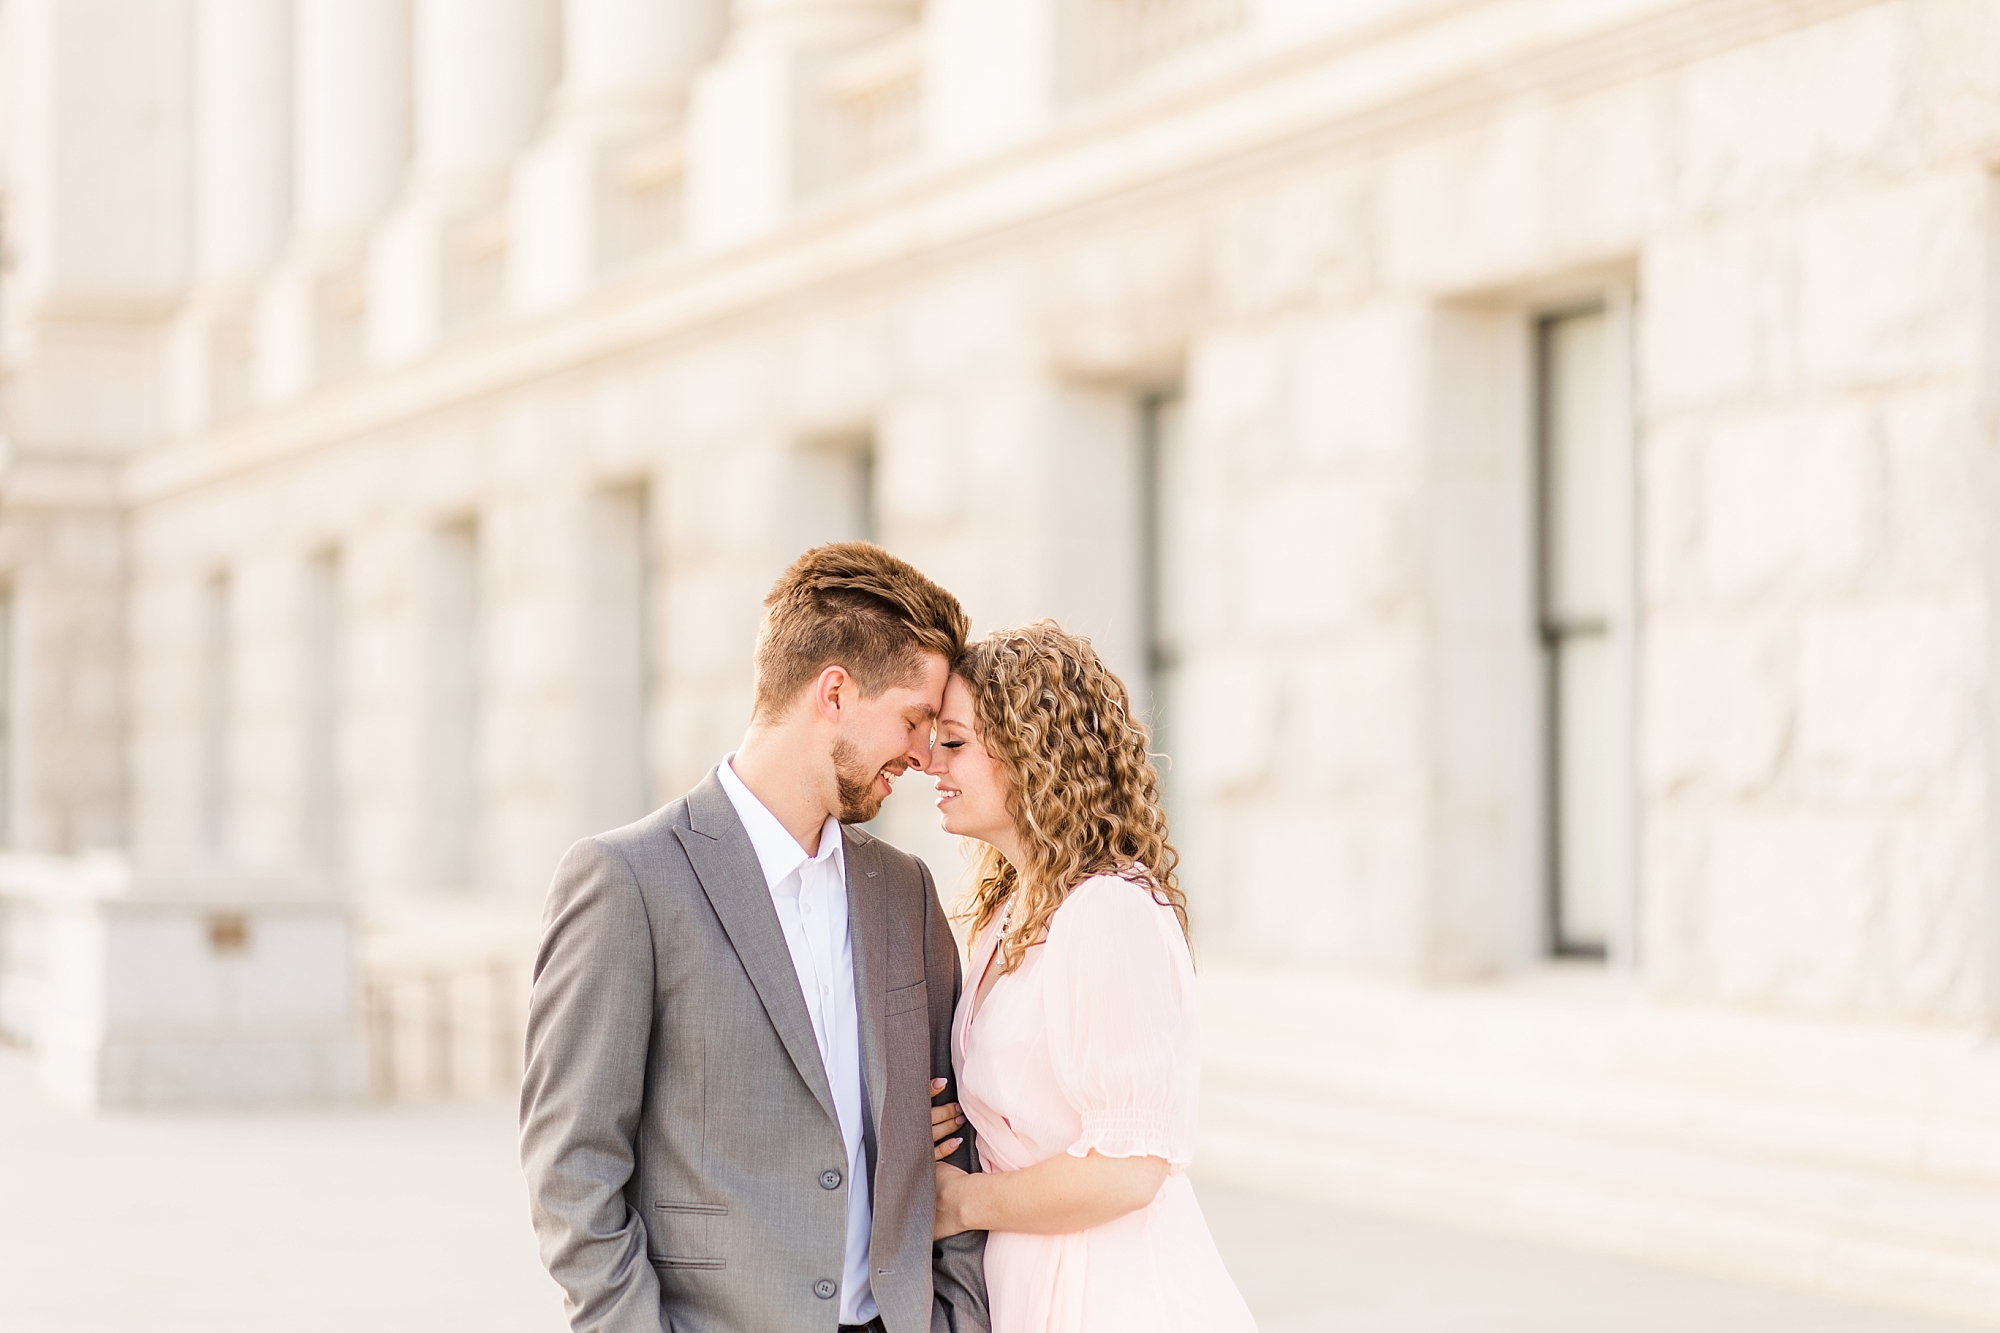 Spring engagements at the Utah State Capitol